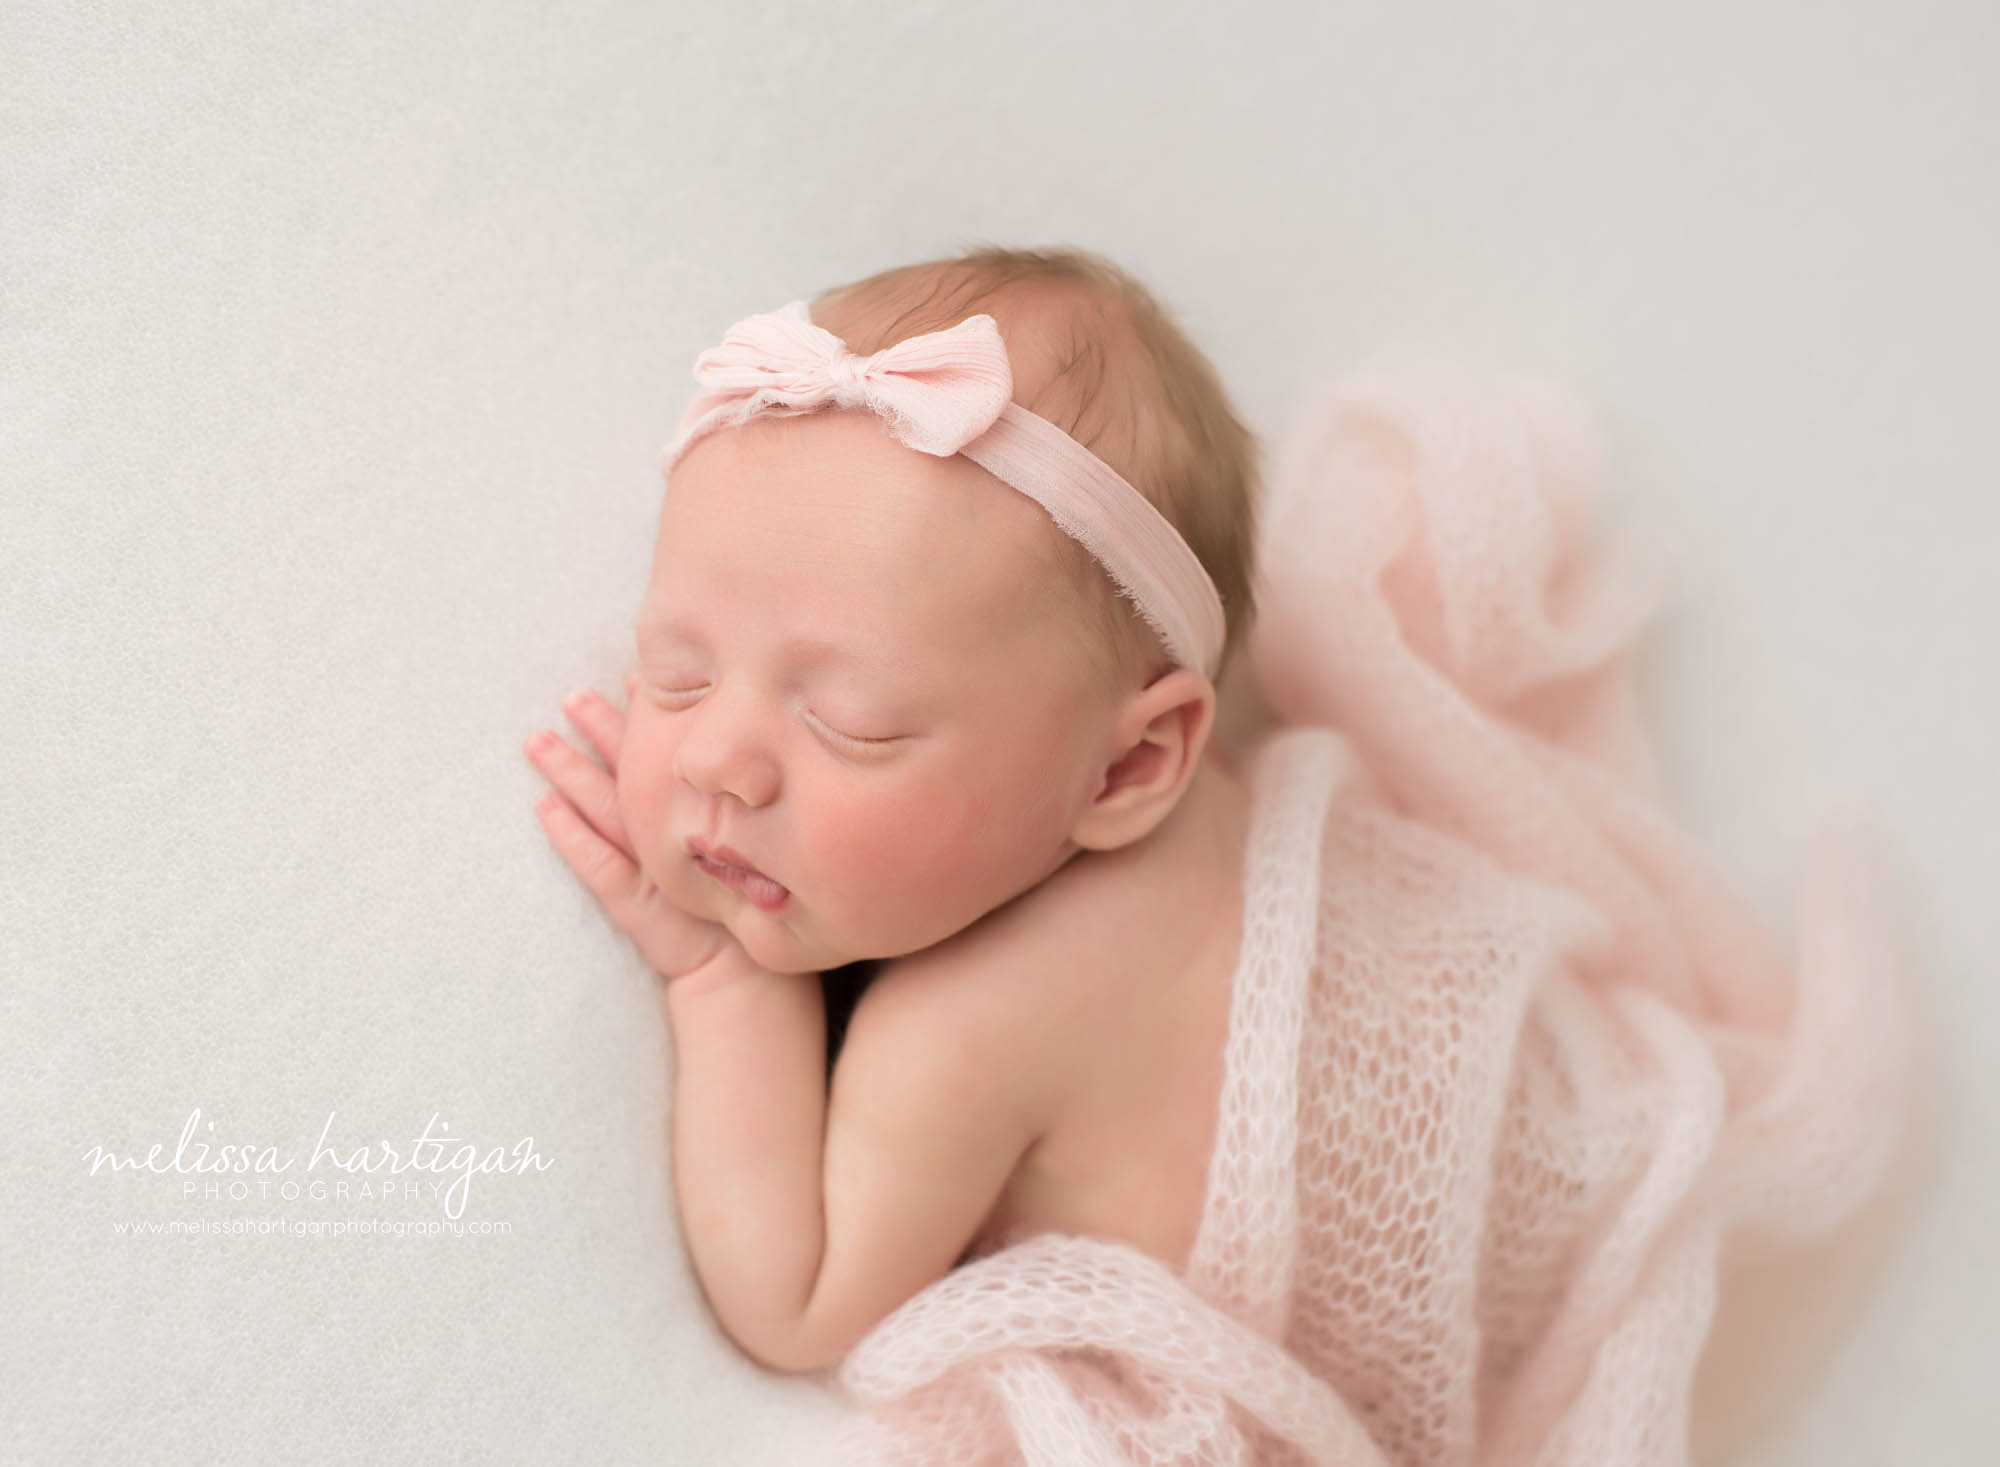 newborn baby girl pose don tummy with hand under cheek with light pink knitted layer drapped over her back wearing light pink bow headband newborn photography hartford county ct